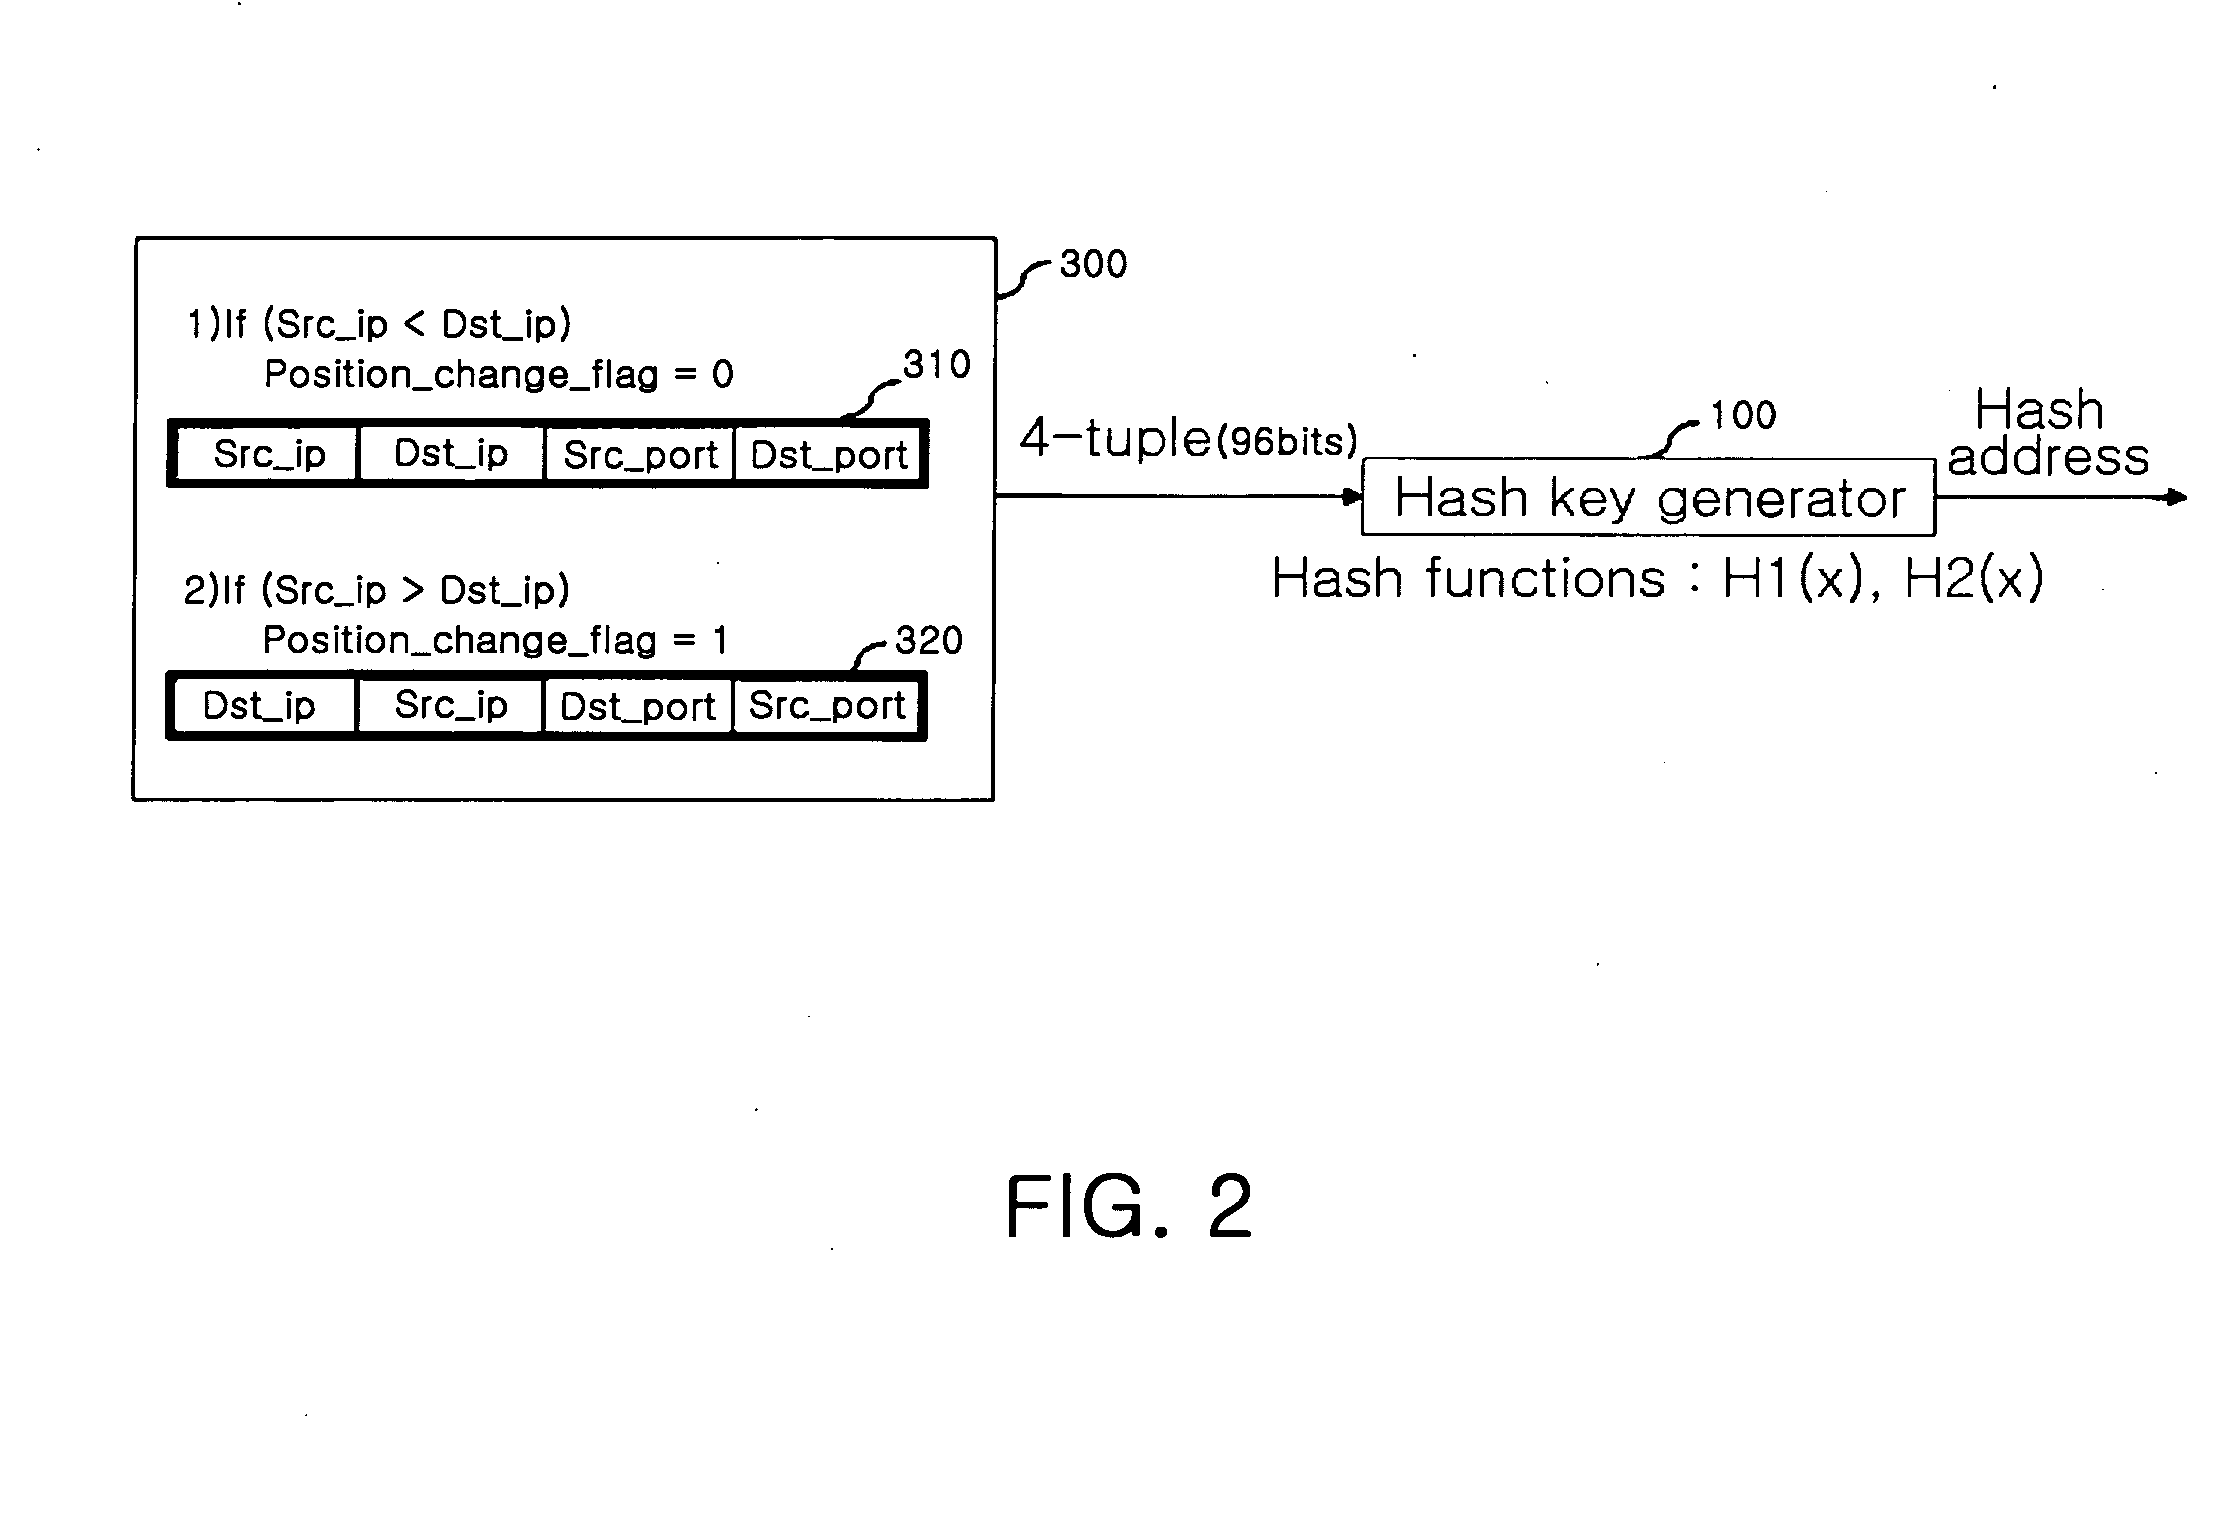 Real-time stateful packet inspection method and apparatus